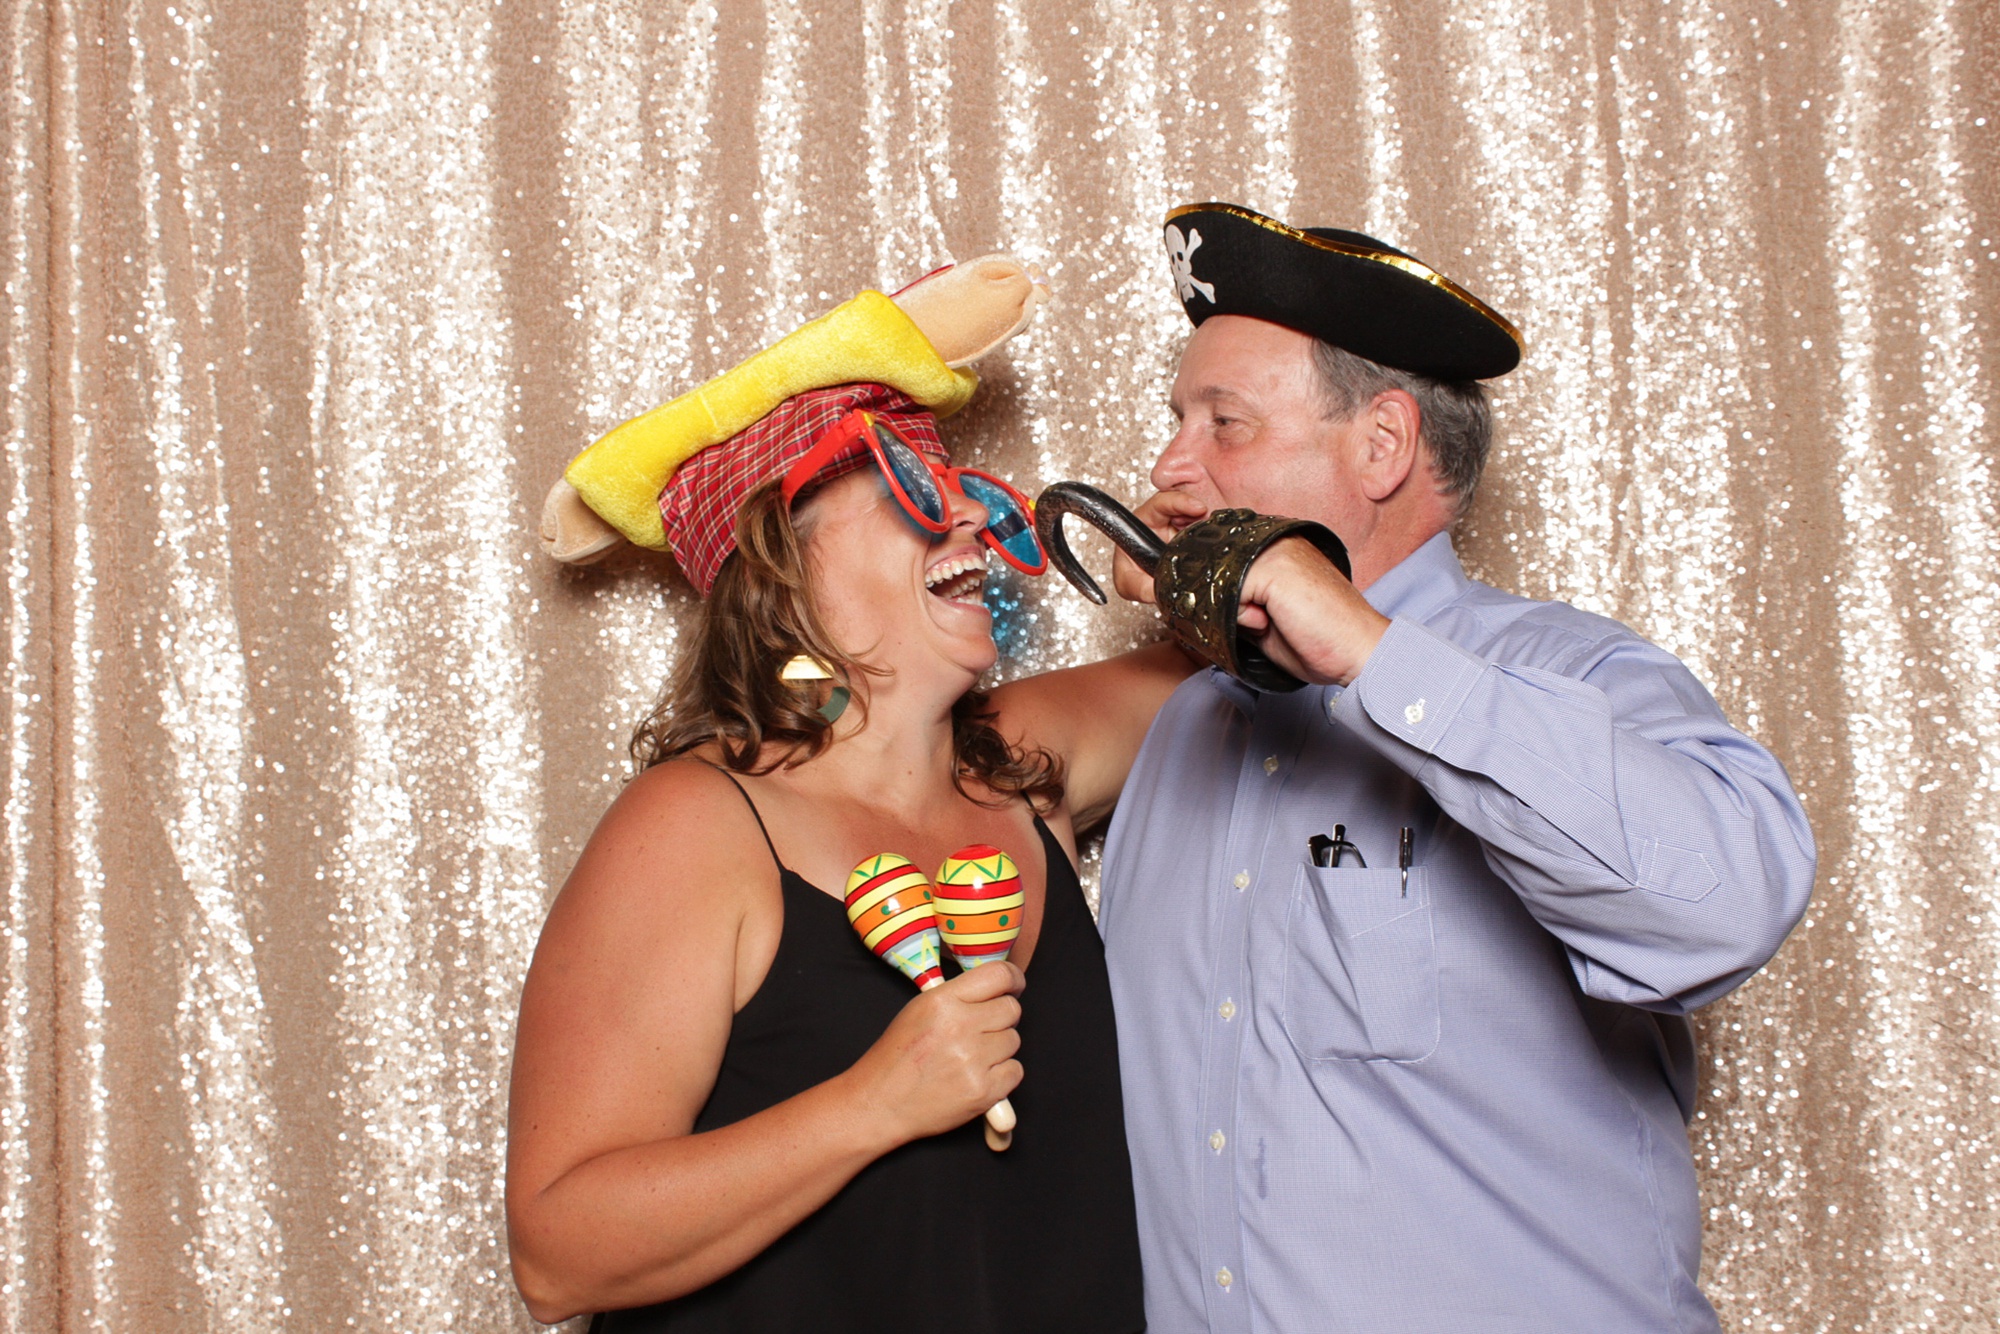 guests play with pirate hook during NJ wedding photo booth